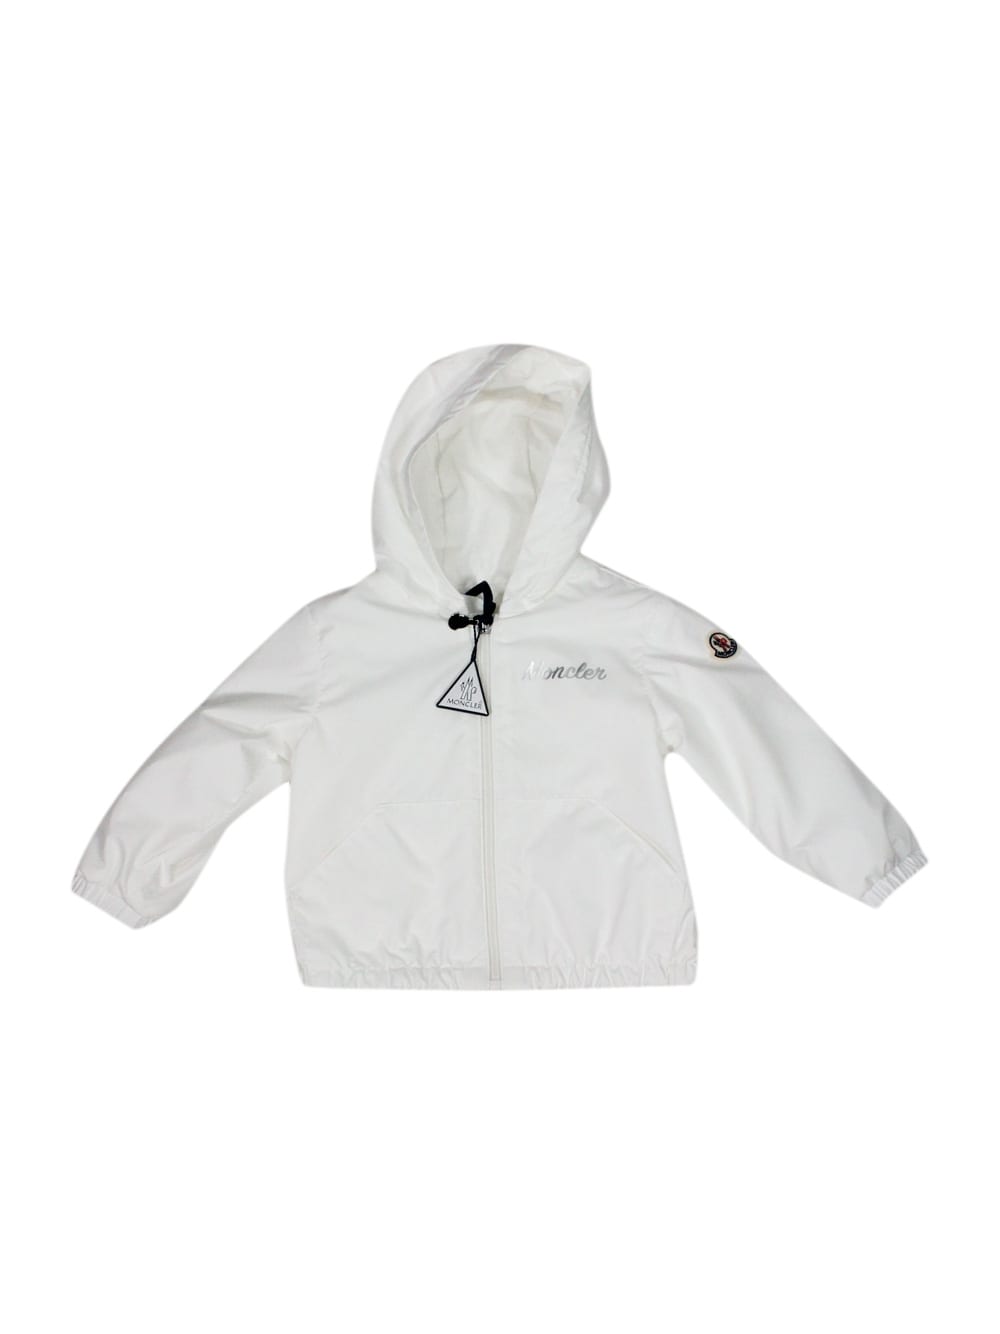 Moncler Evanthe Baby Windproof Jacket With Hood And Zip Closure And Silver Logo Writing On The Chest.